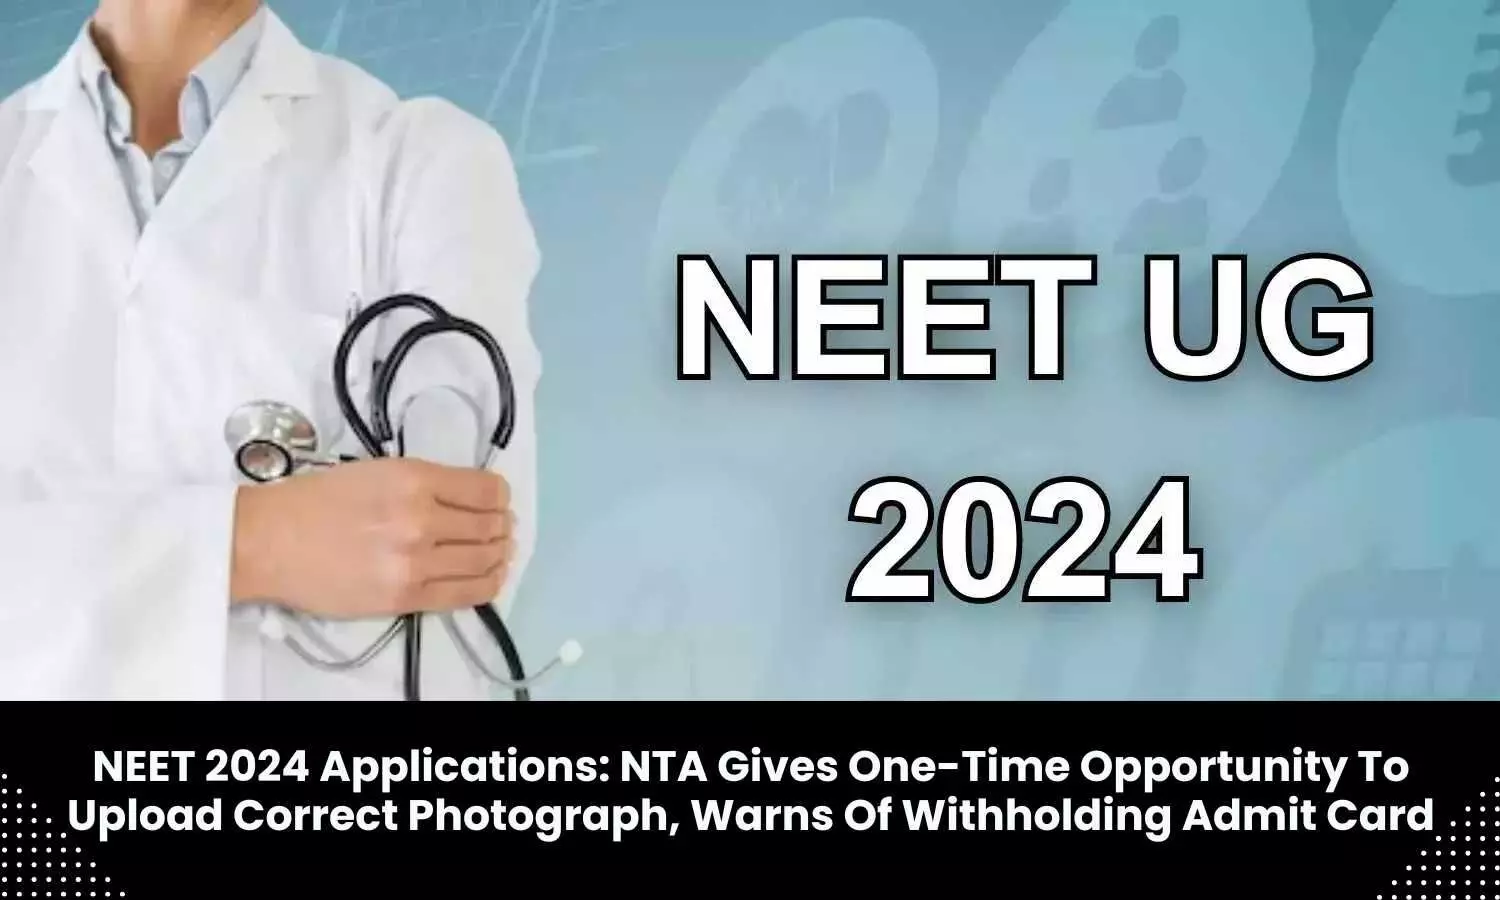 NEET 2024 applications: NTA provides one-time opportunity to upload correct photograph